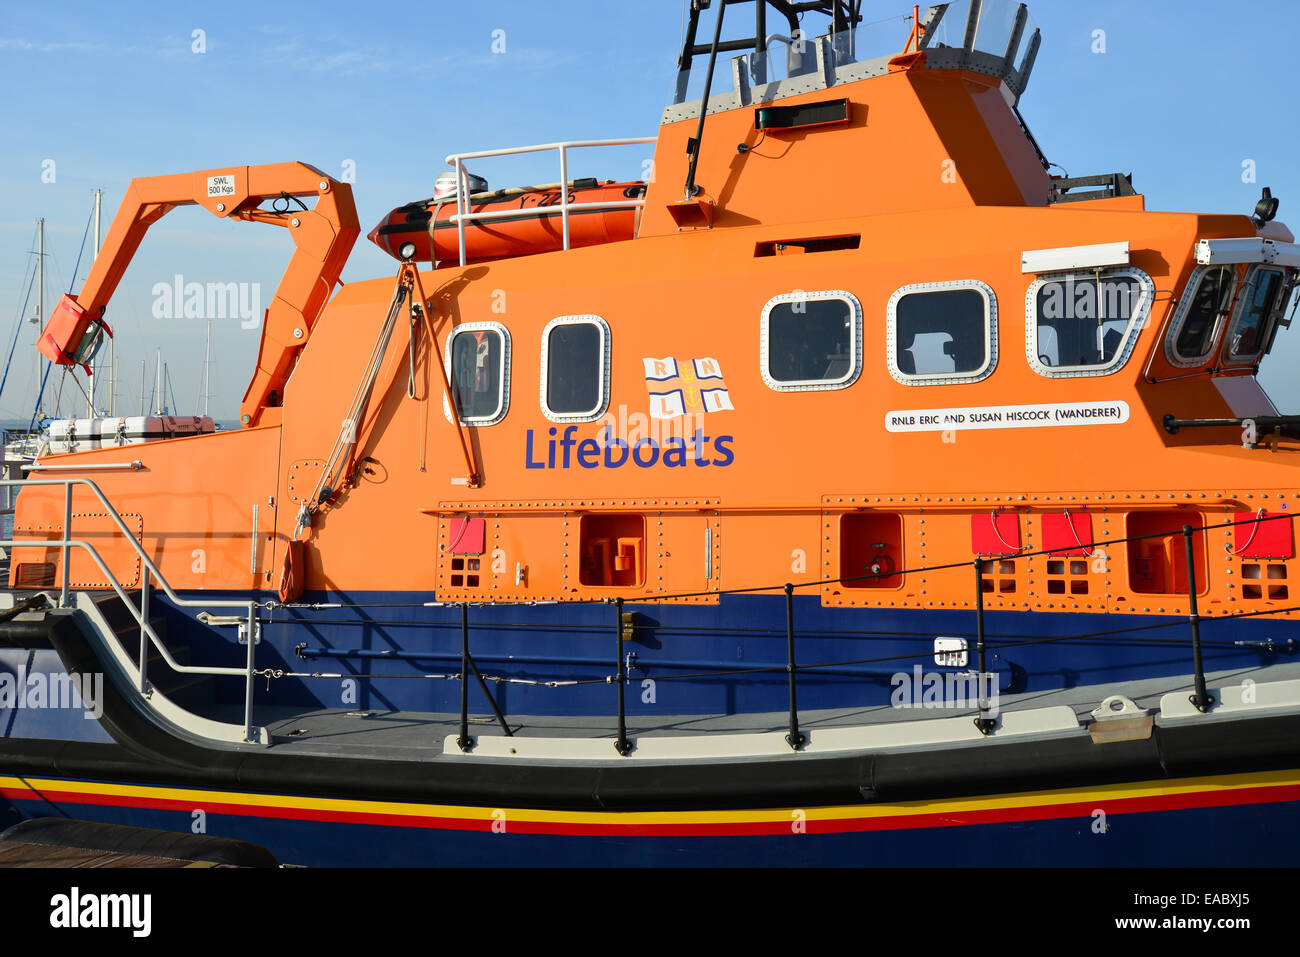 Die Royal National Lifeboat Institution (RNLI) Rettungsboot, Yarmouth Harbour, Yarmouth, Isle Of Wight, England, Vereinigtes Königreich Stockfoto